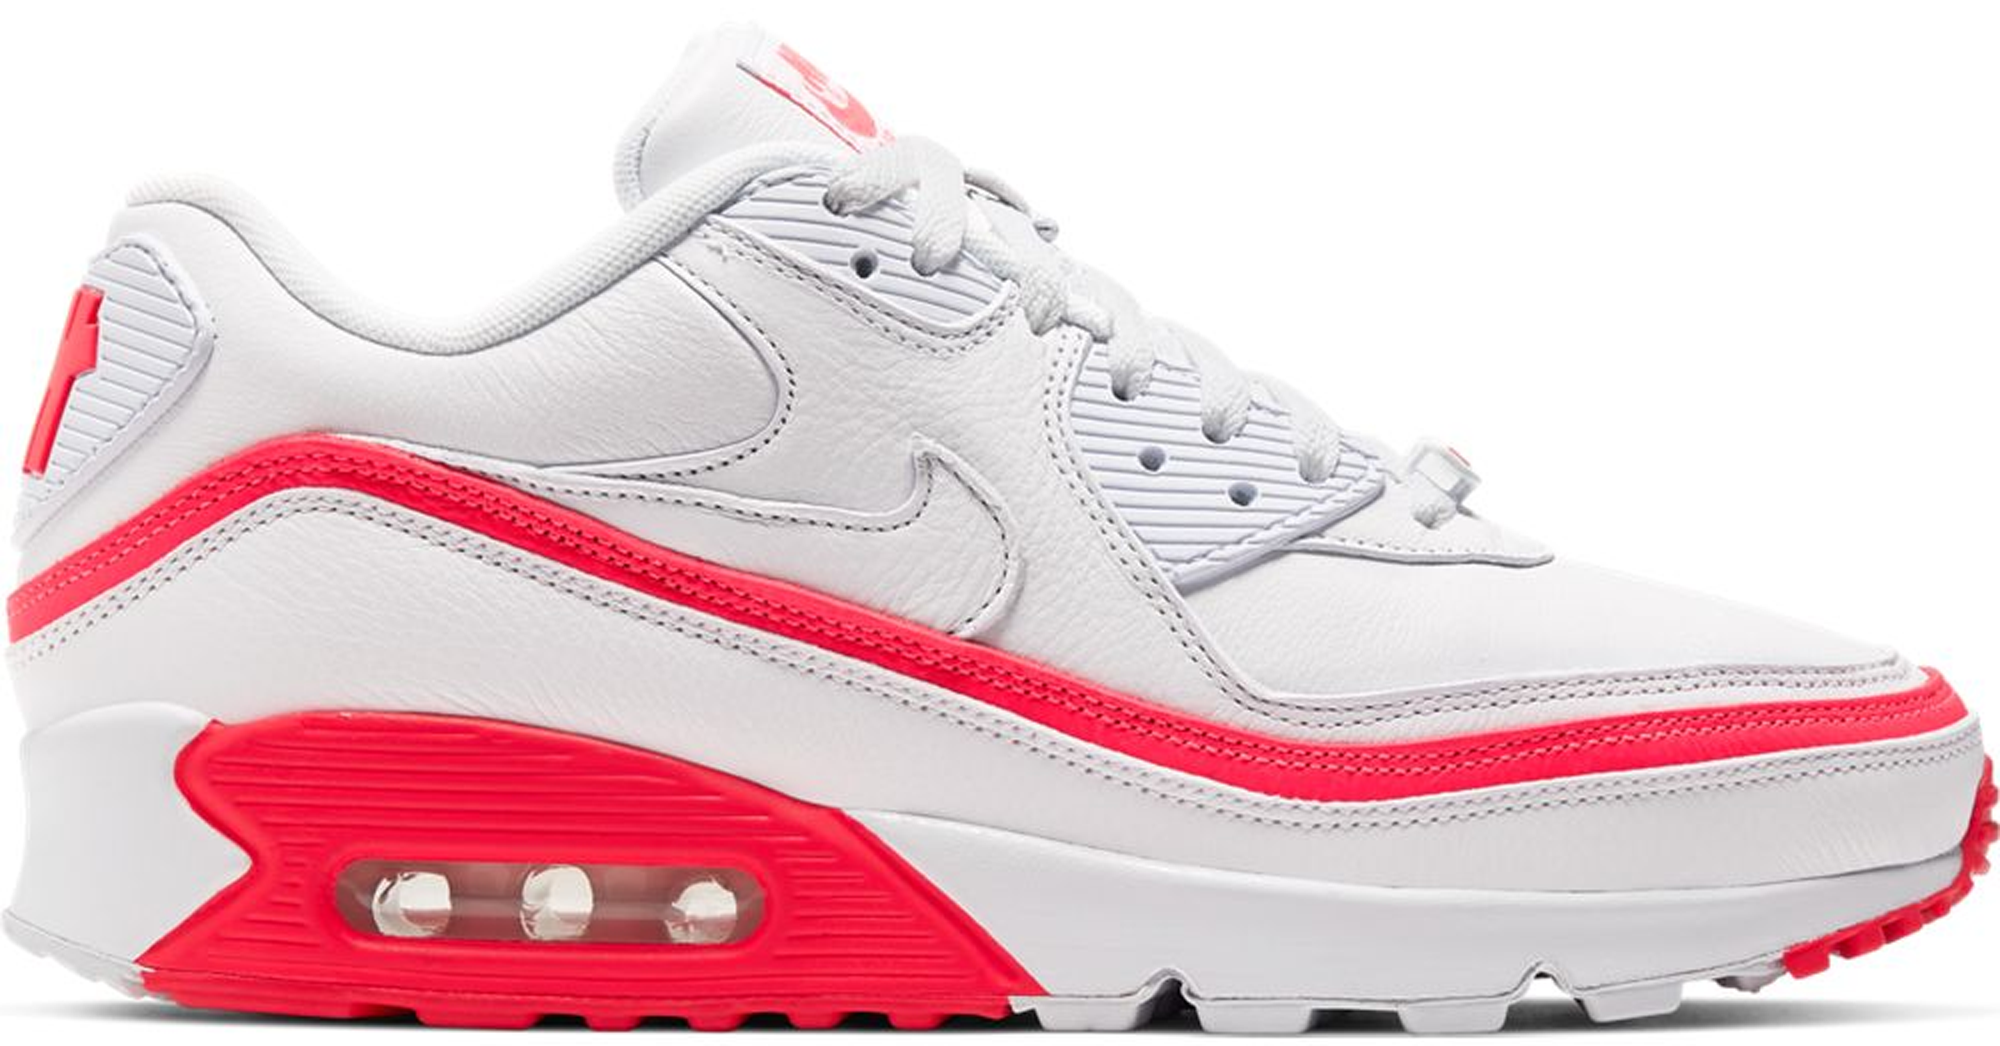 new nike air max red and white